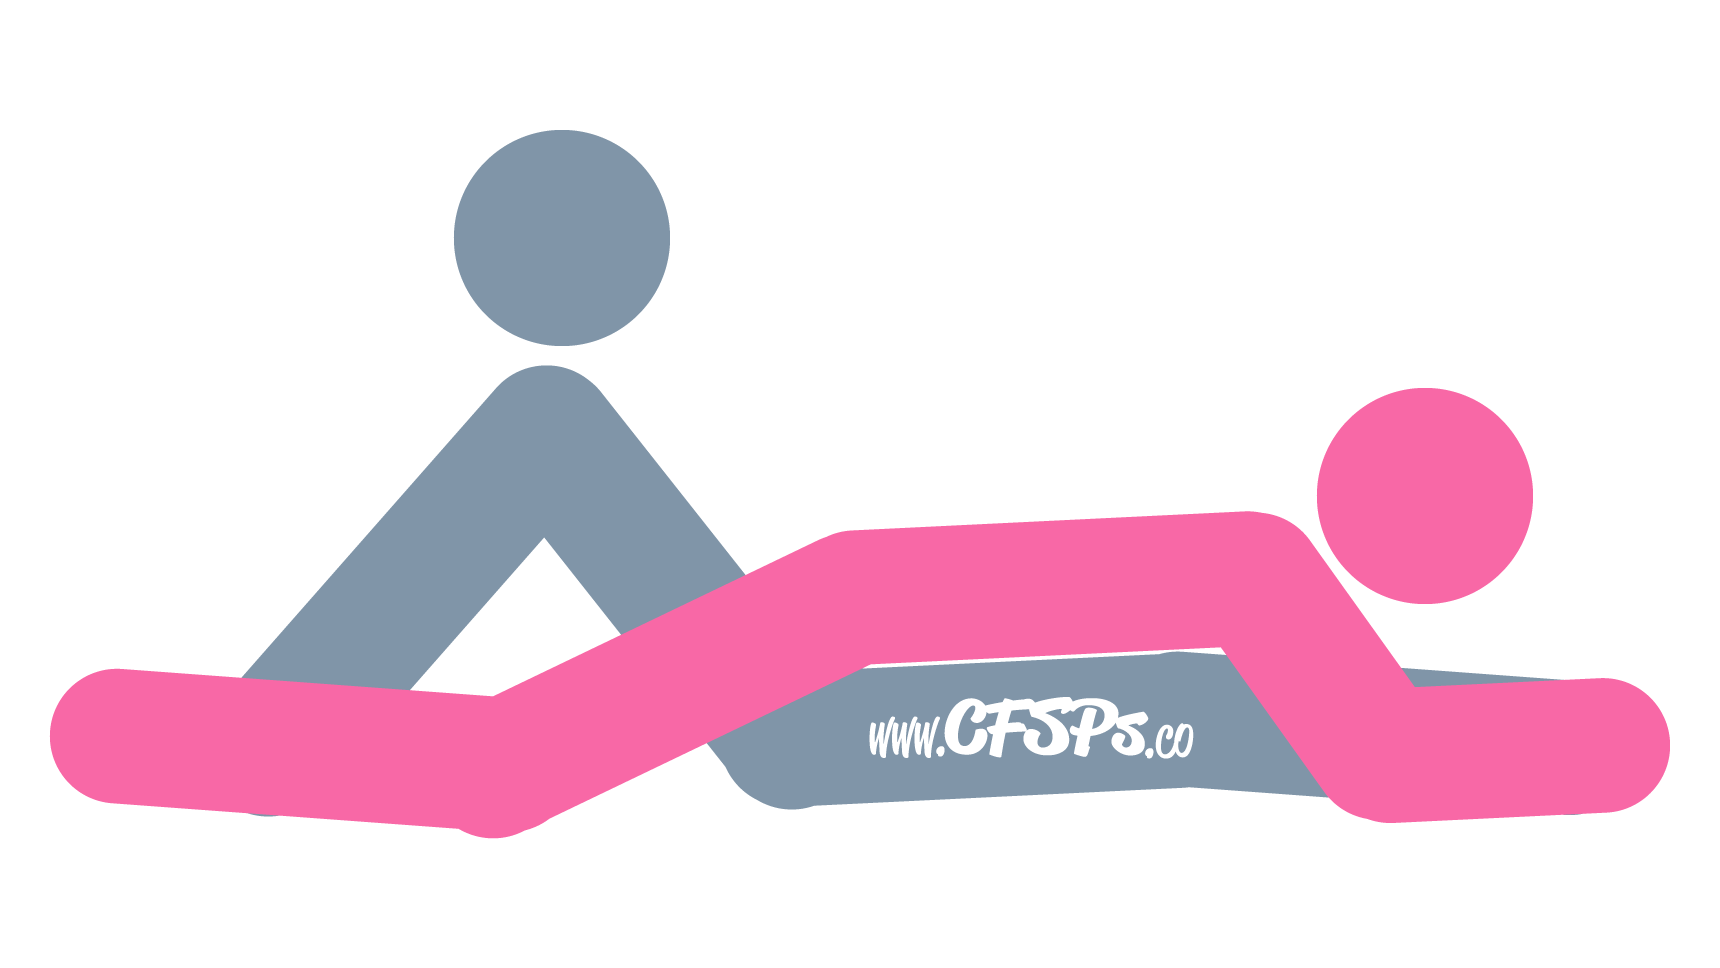 This stick figure image depicts a man and woman having sex in the Gallery sex position. The man is sitting with his legs straight out and together, and his arms are behind his body on the bed. The woman is straddling his pelvis while she's on her stomach with her head near his feet.